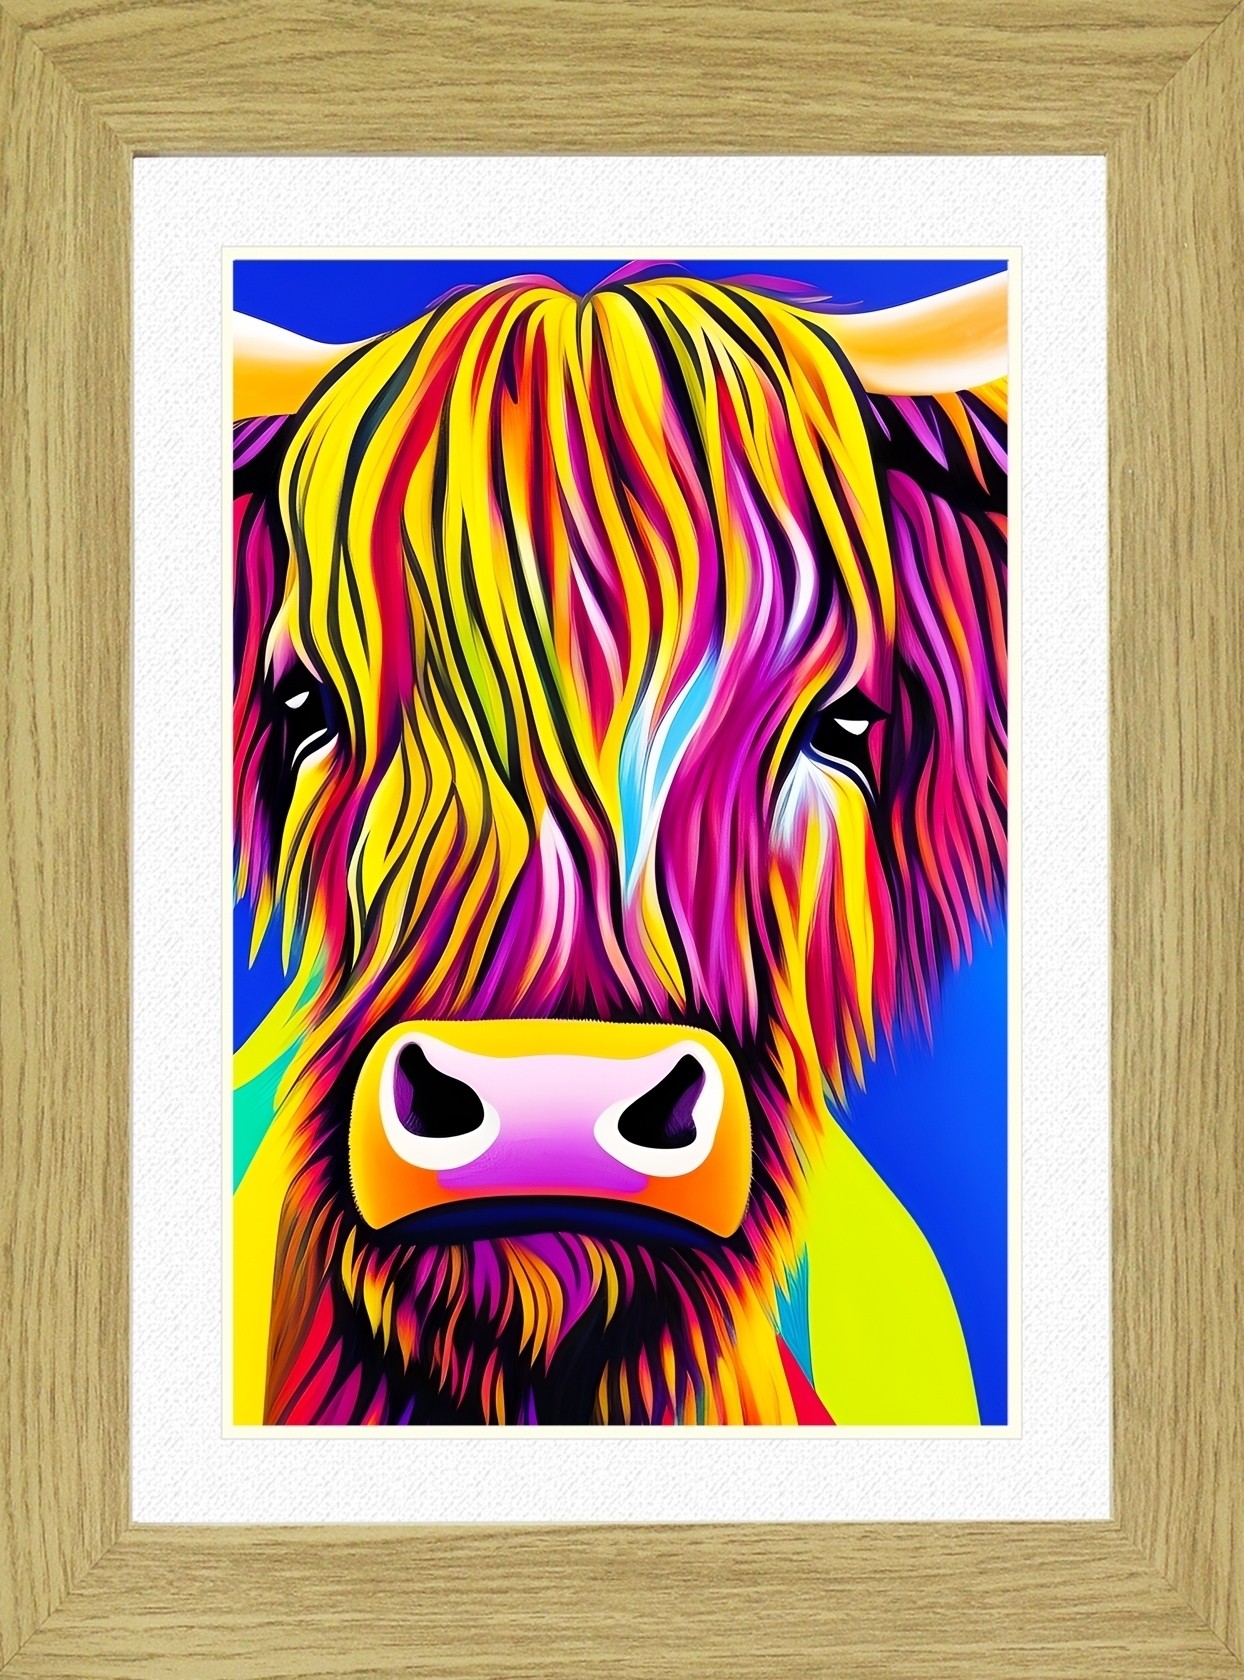 Cow Animal Picture Framed Colourful Abstract Art (25cm x 20cm Light Oak Frame)